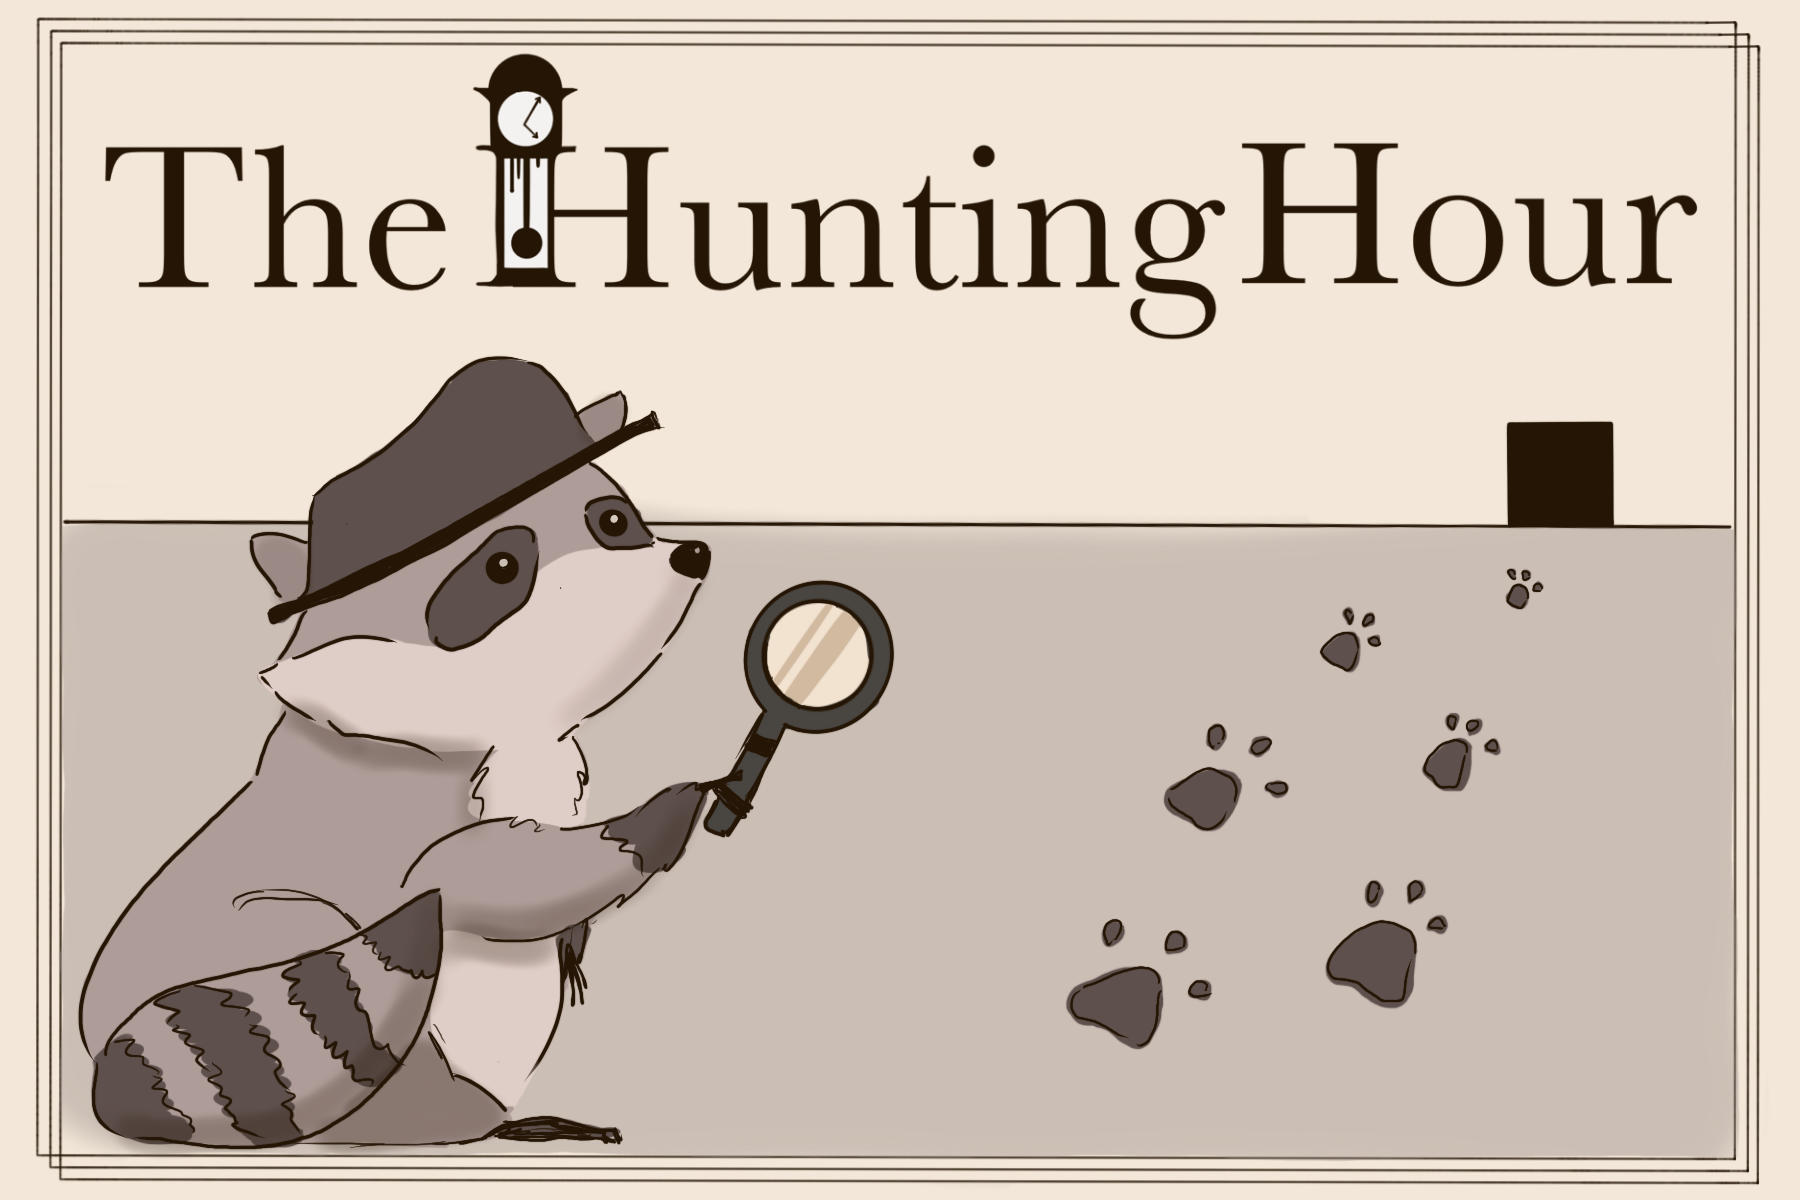 Title card for The Hunting Hour featuring a detective raccoon.